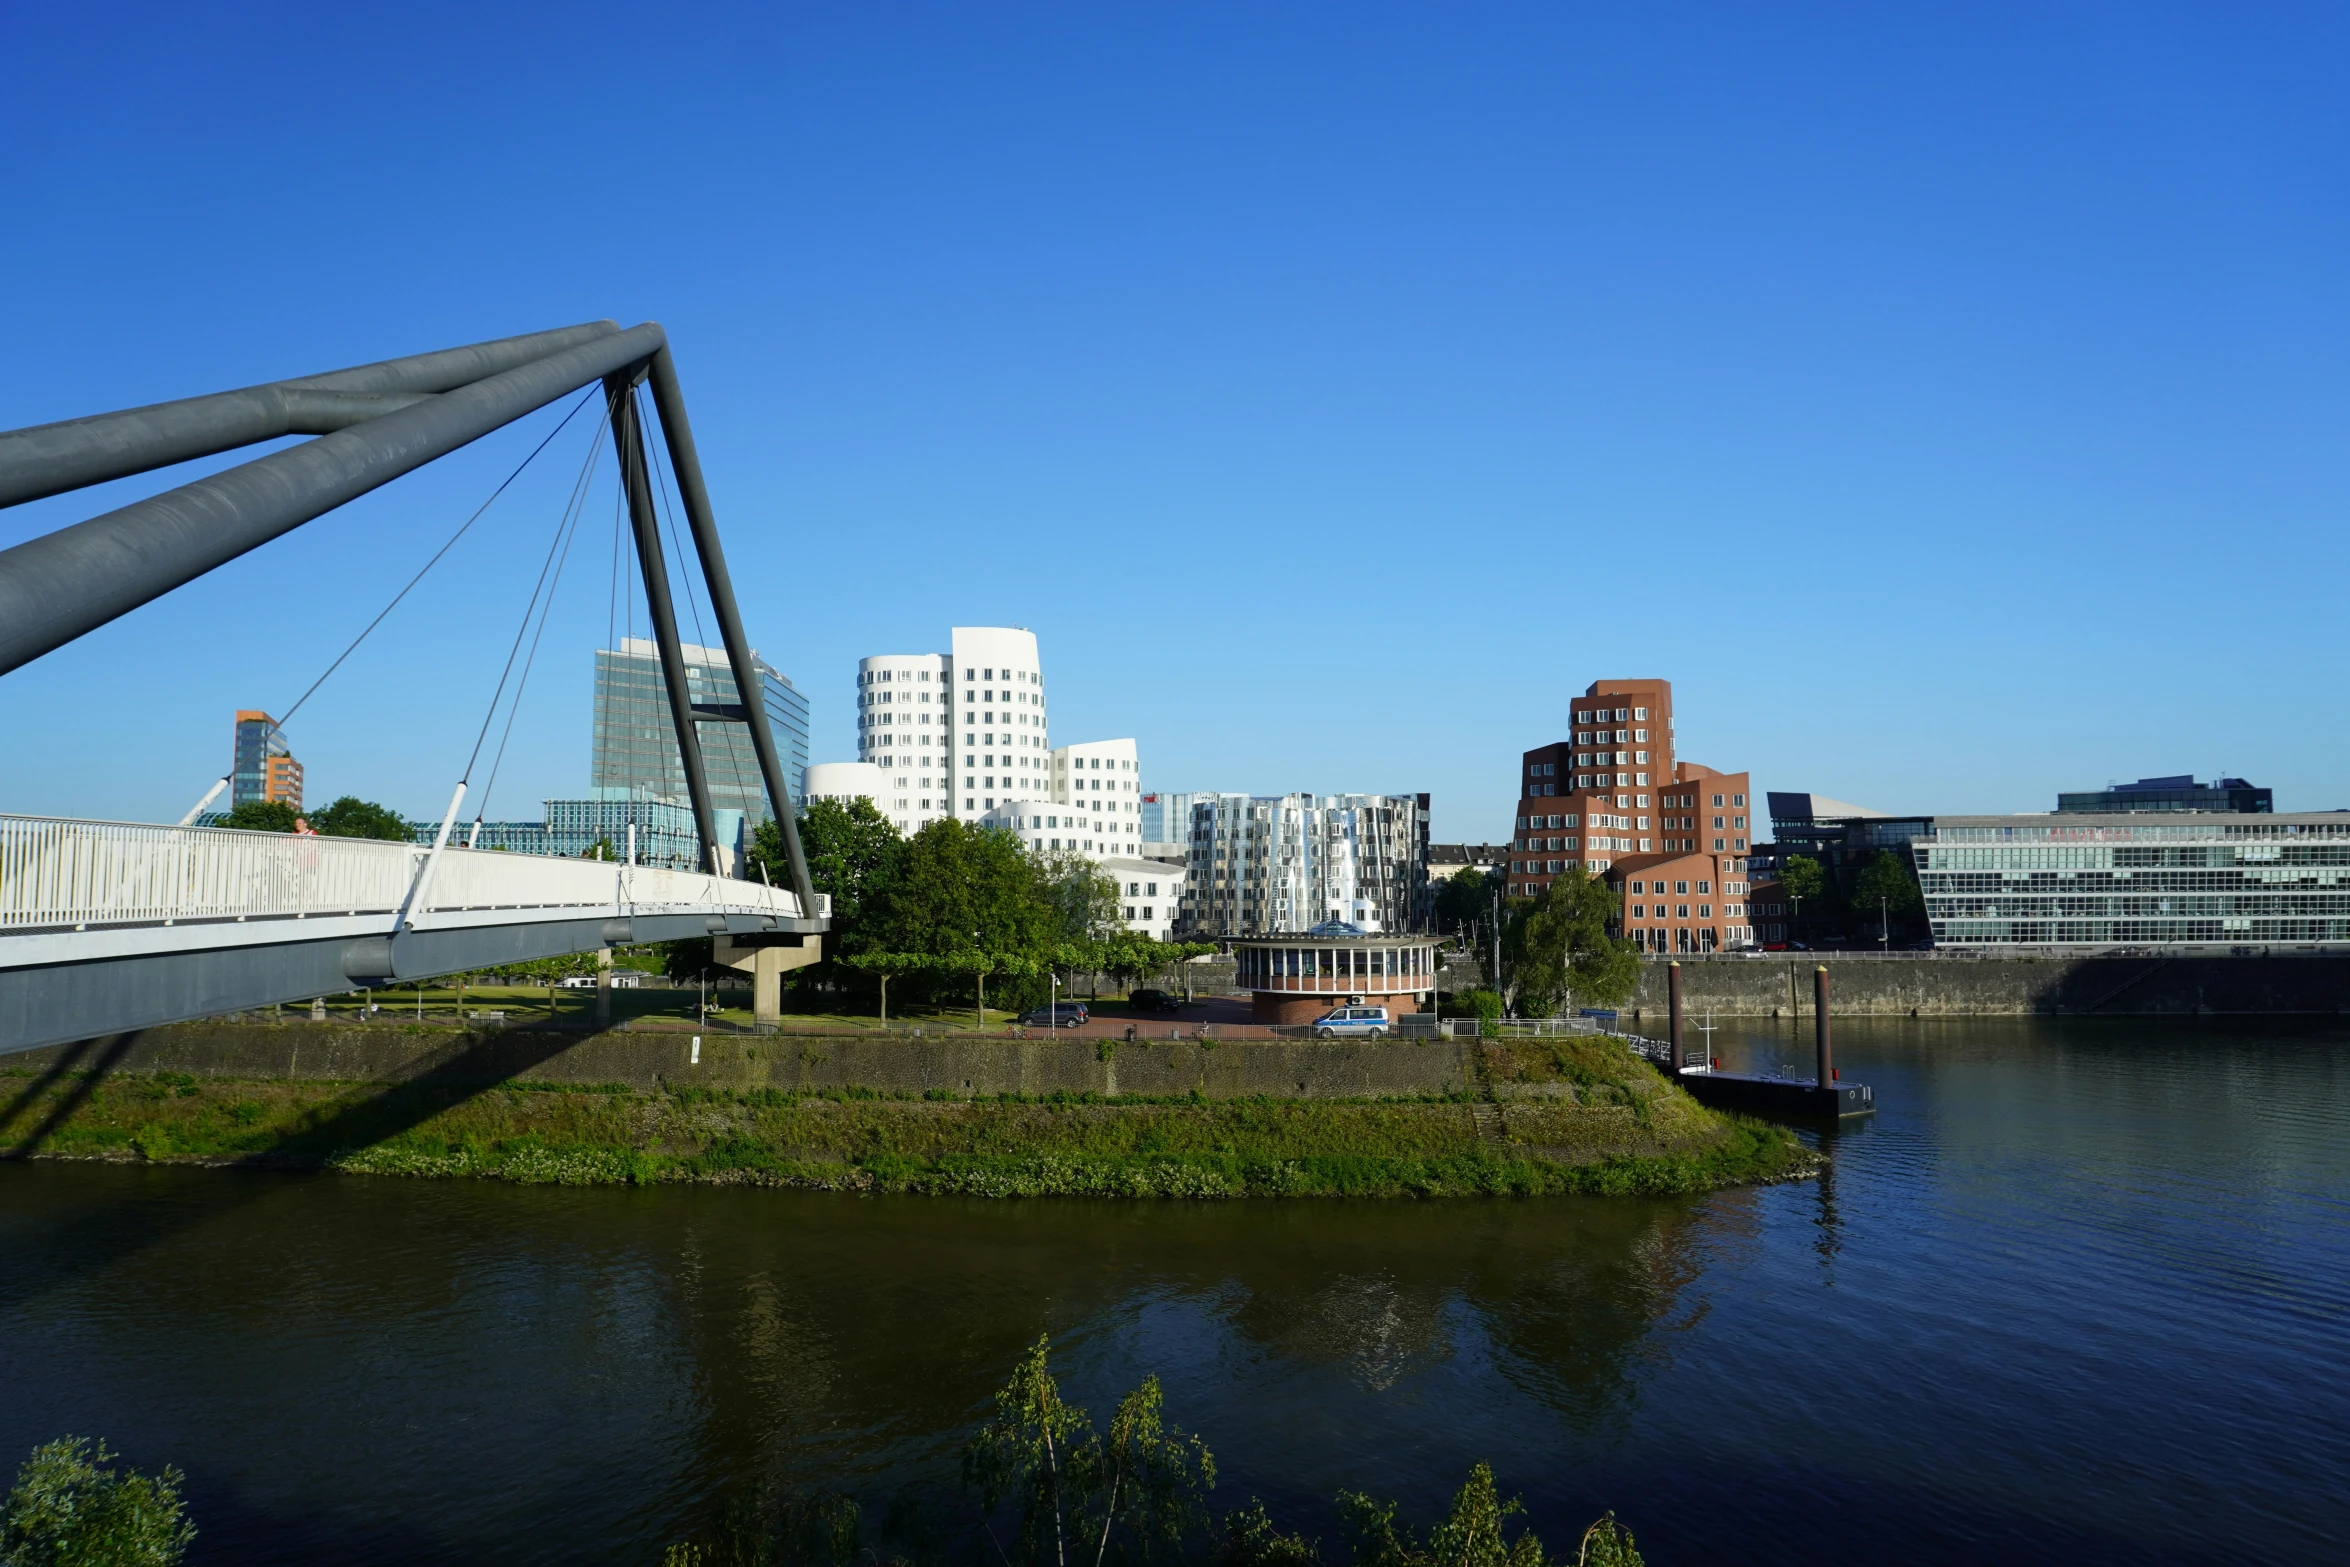 the bridge stretches along the river in front of a city skyline